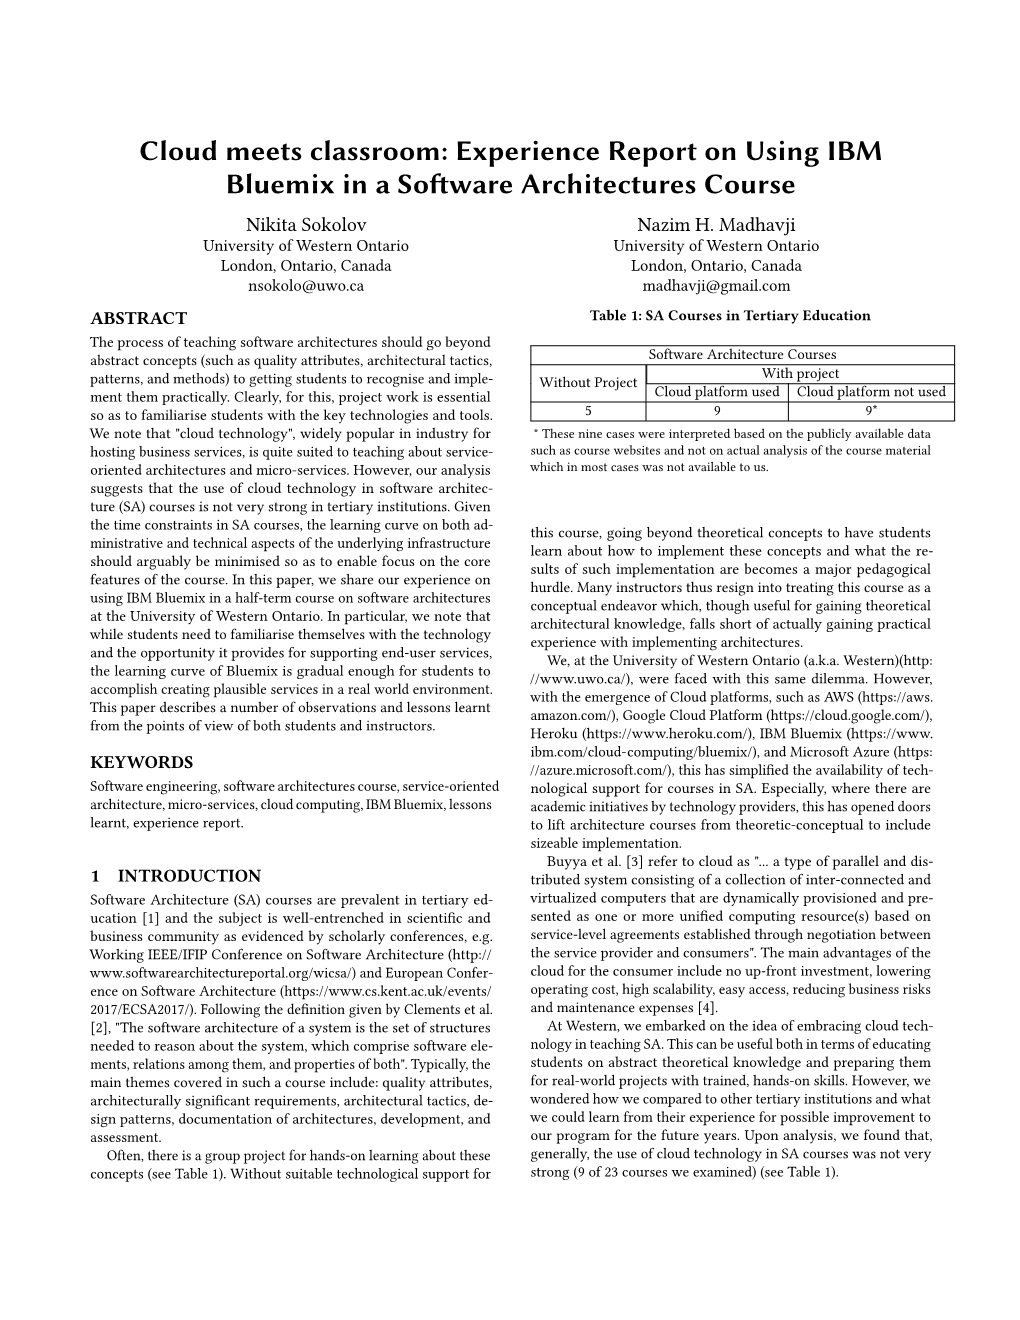 Cloud Meets Classroom: Experience Report on Using IBM Bluemix in a Software Architectures Course Nikita Sokolov Nazim H